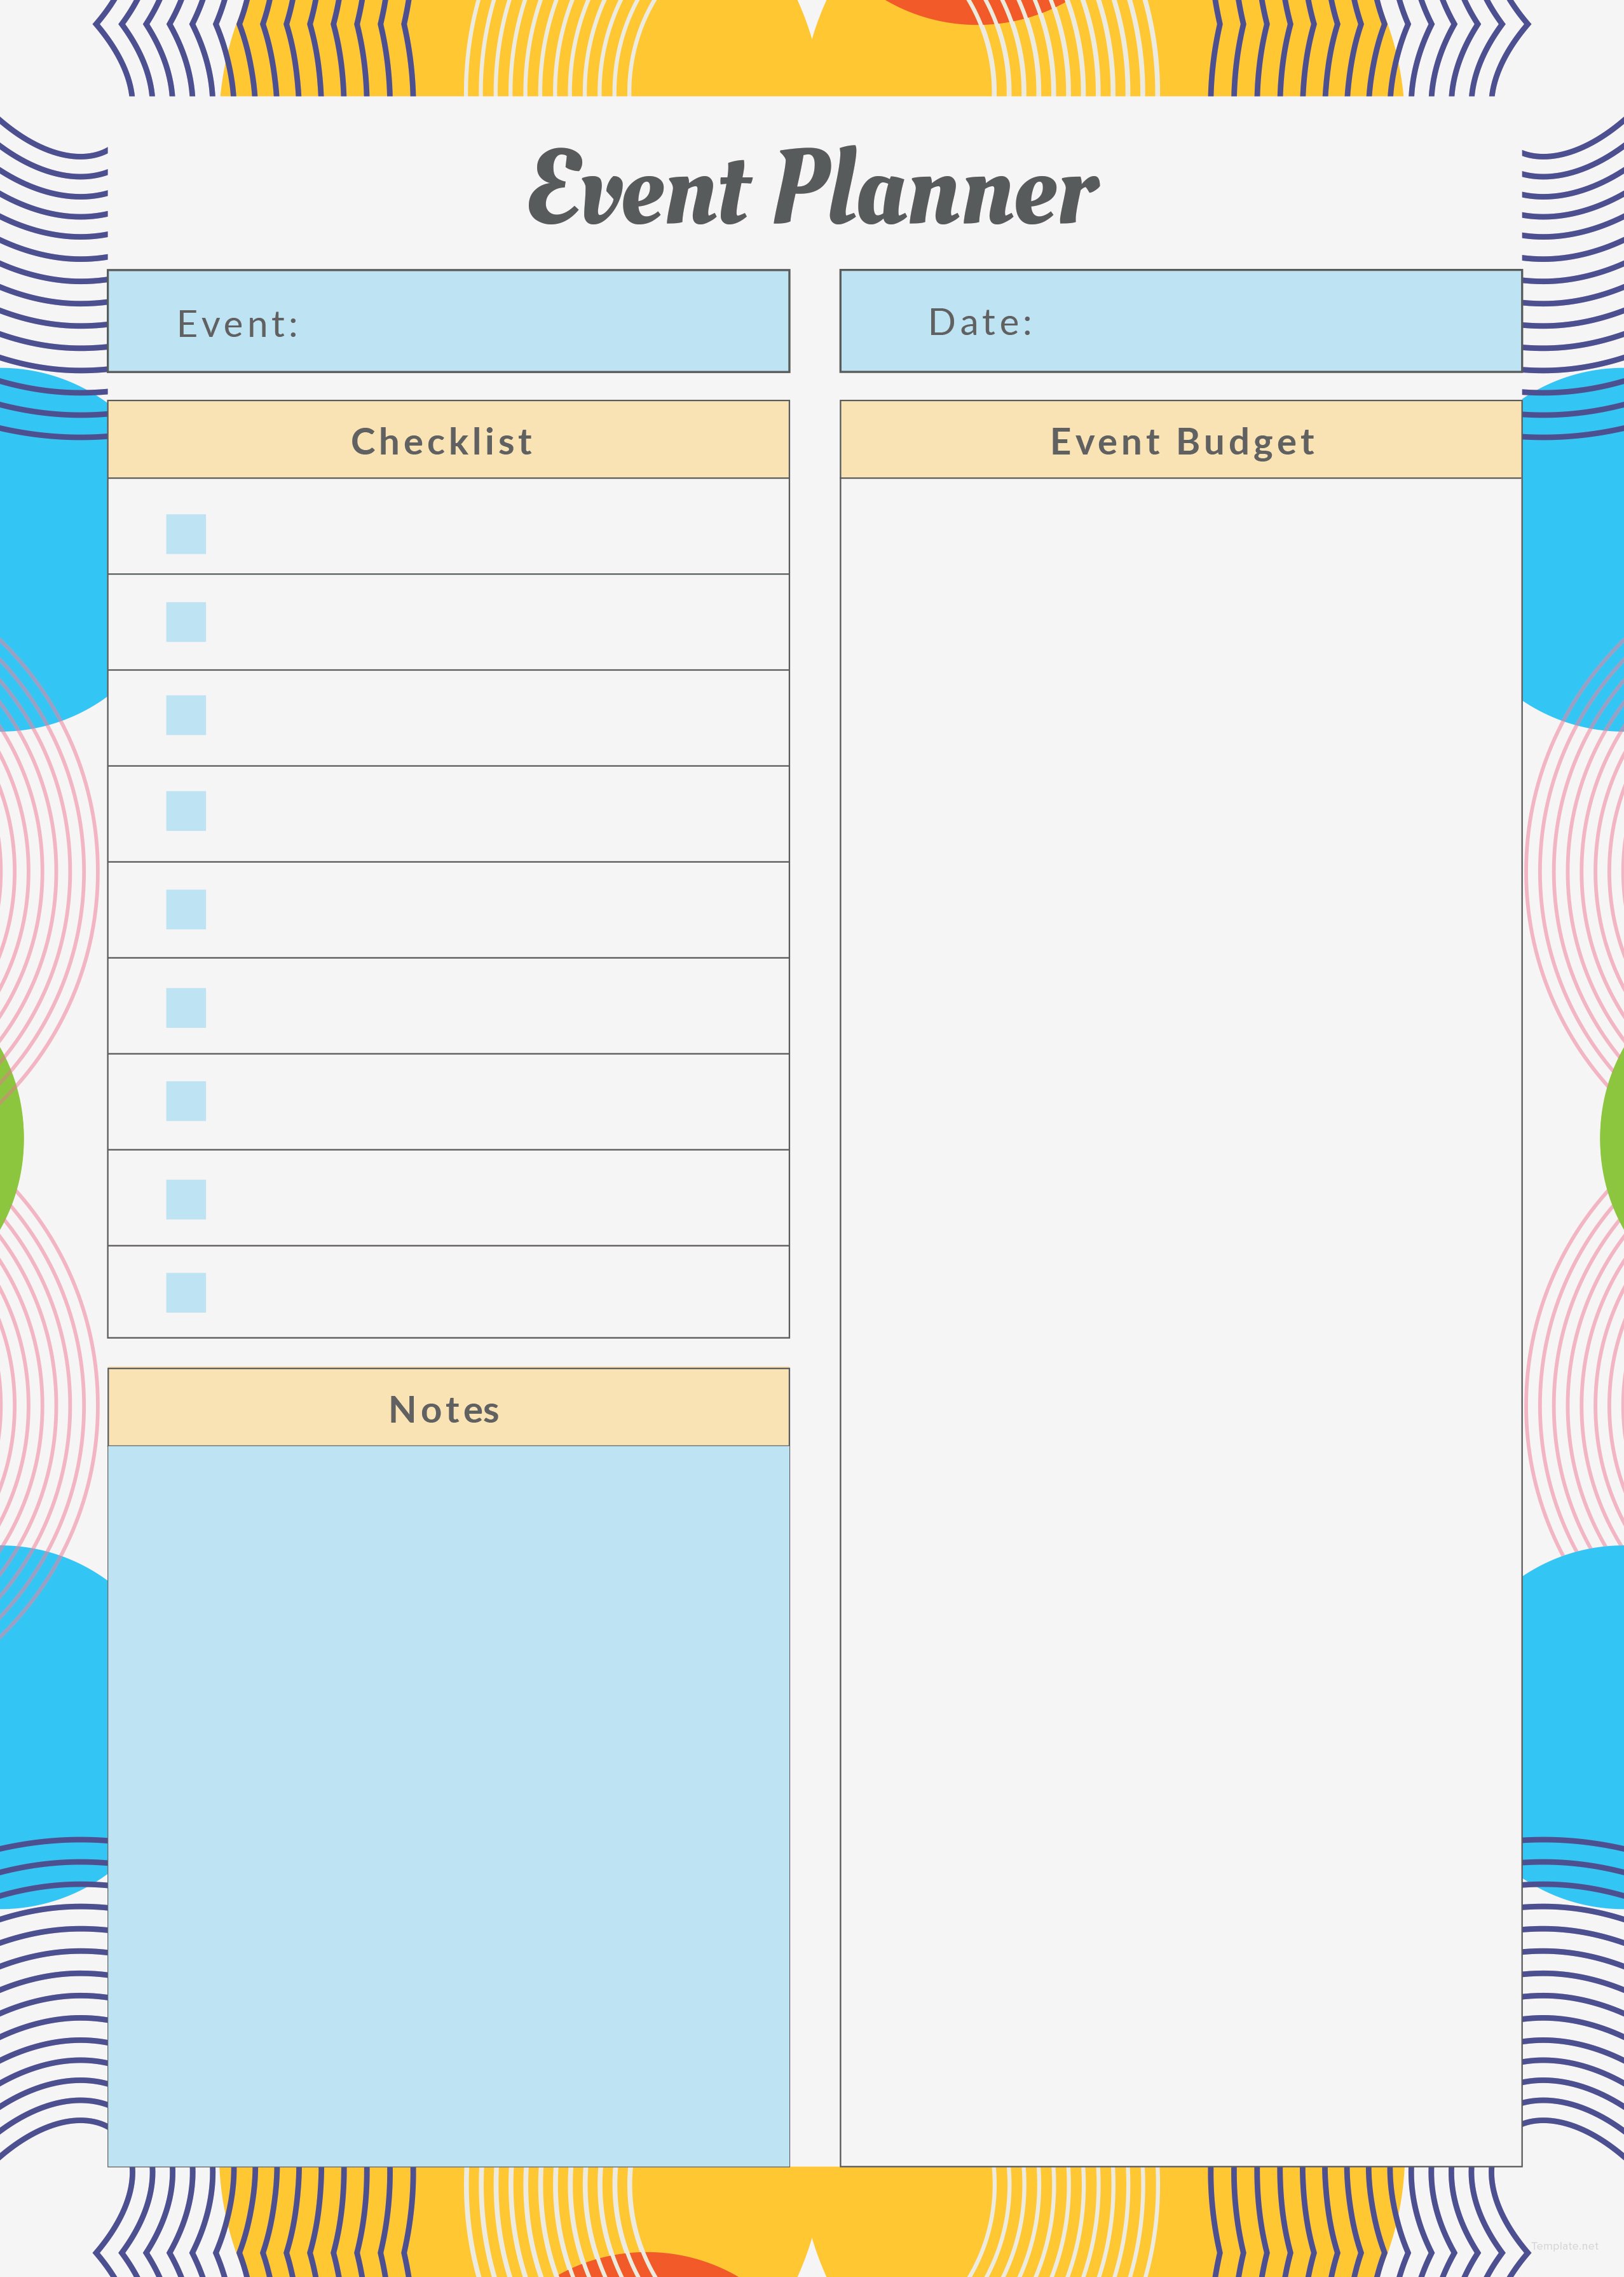 Free Event Planner Template in Adobe Illustrator, InDesign